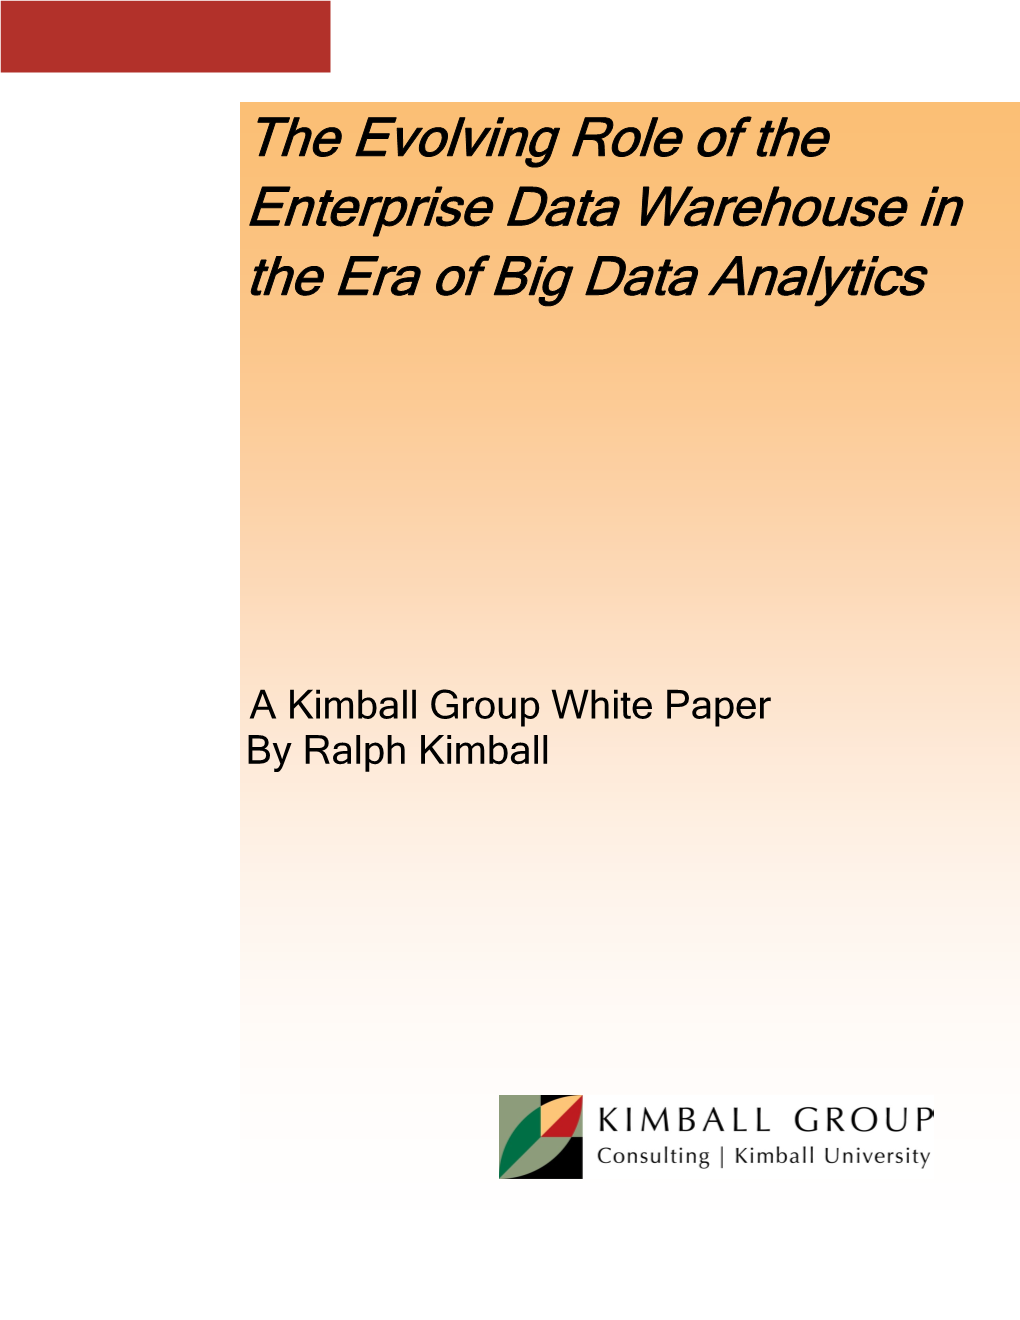 The Evolving Role of the Enterprise Data Warehouse in the Era of Big Data Analytics